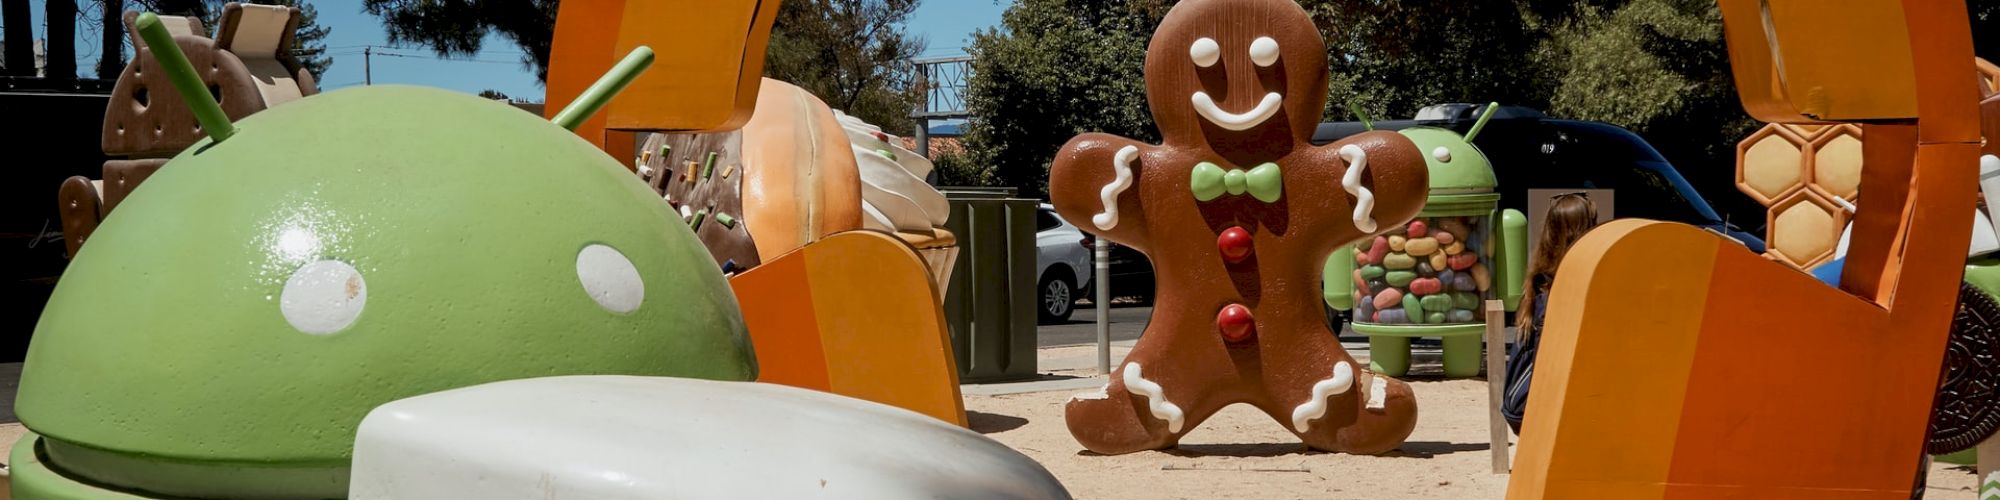 The image features Android mascot statues, including one holding a marshmallow and a large gingerbread figure, in an outdoor setting with trees in the background.